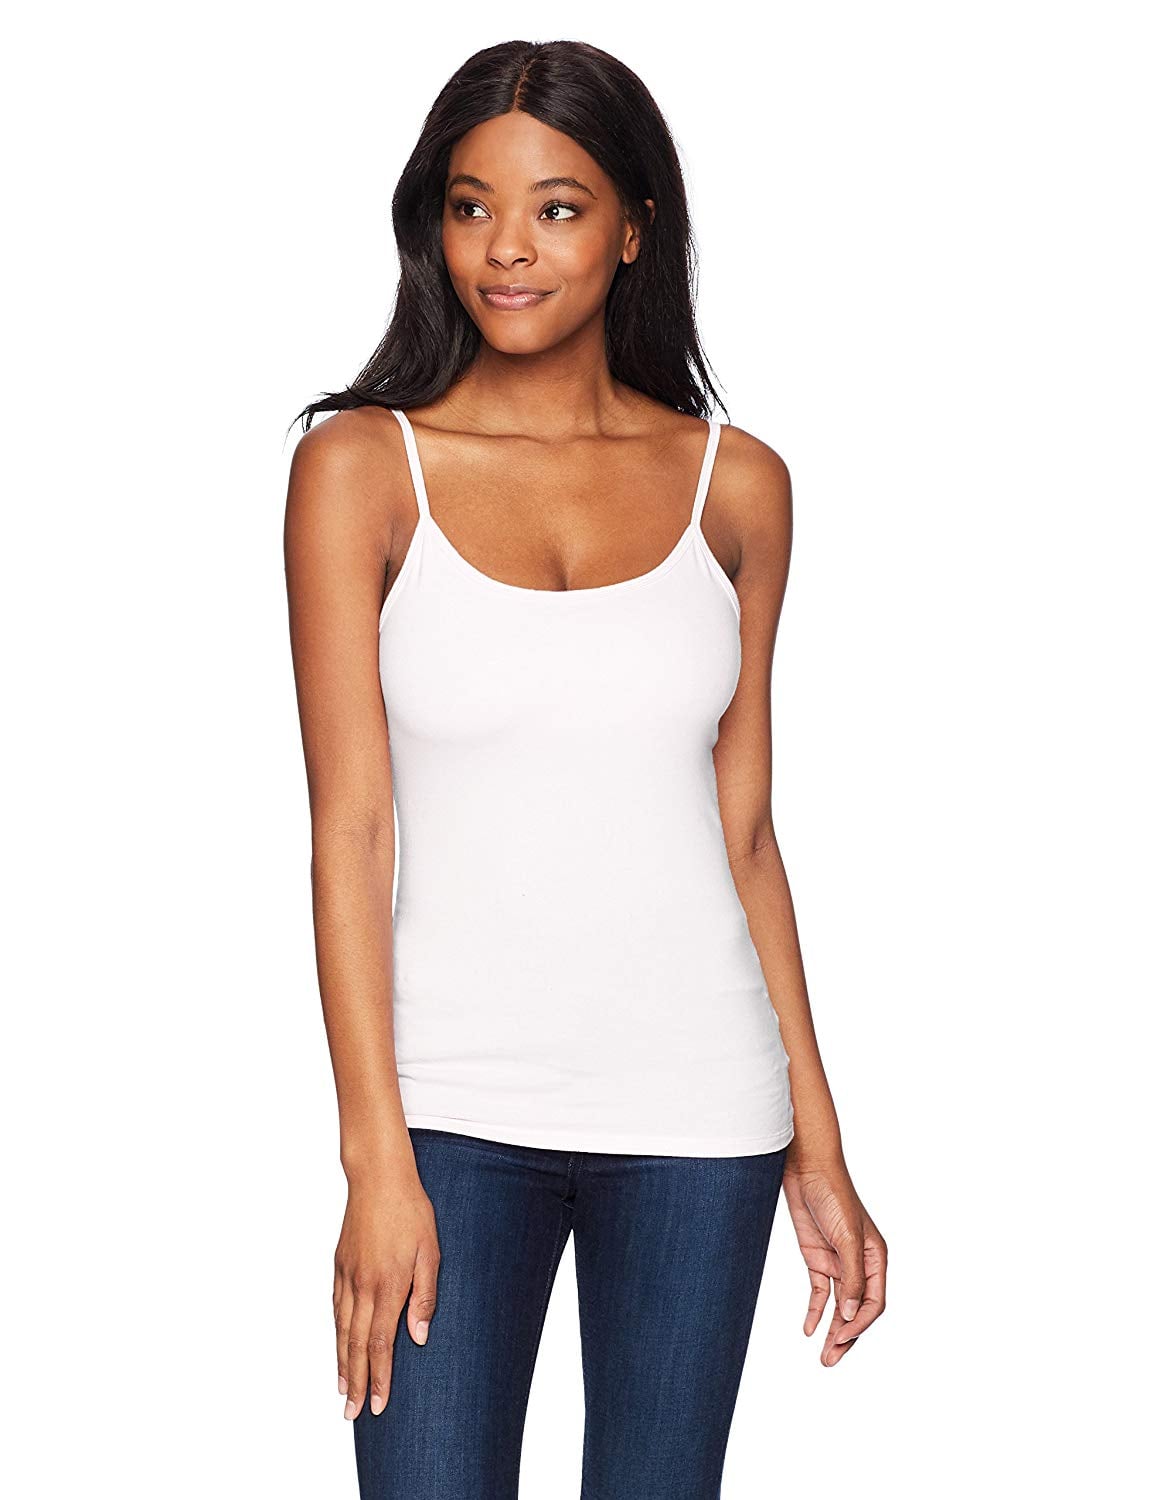 Hanes Stretch Cotton Cami With Built-In Shelf Bra, This Is the Only White  Tee I Ever Wear, and I Bought It on  For $5